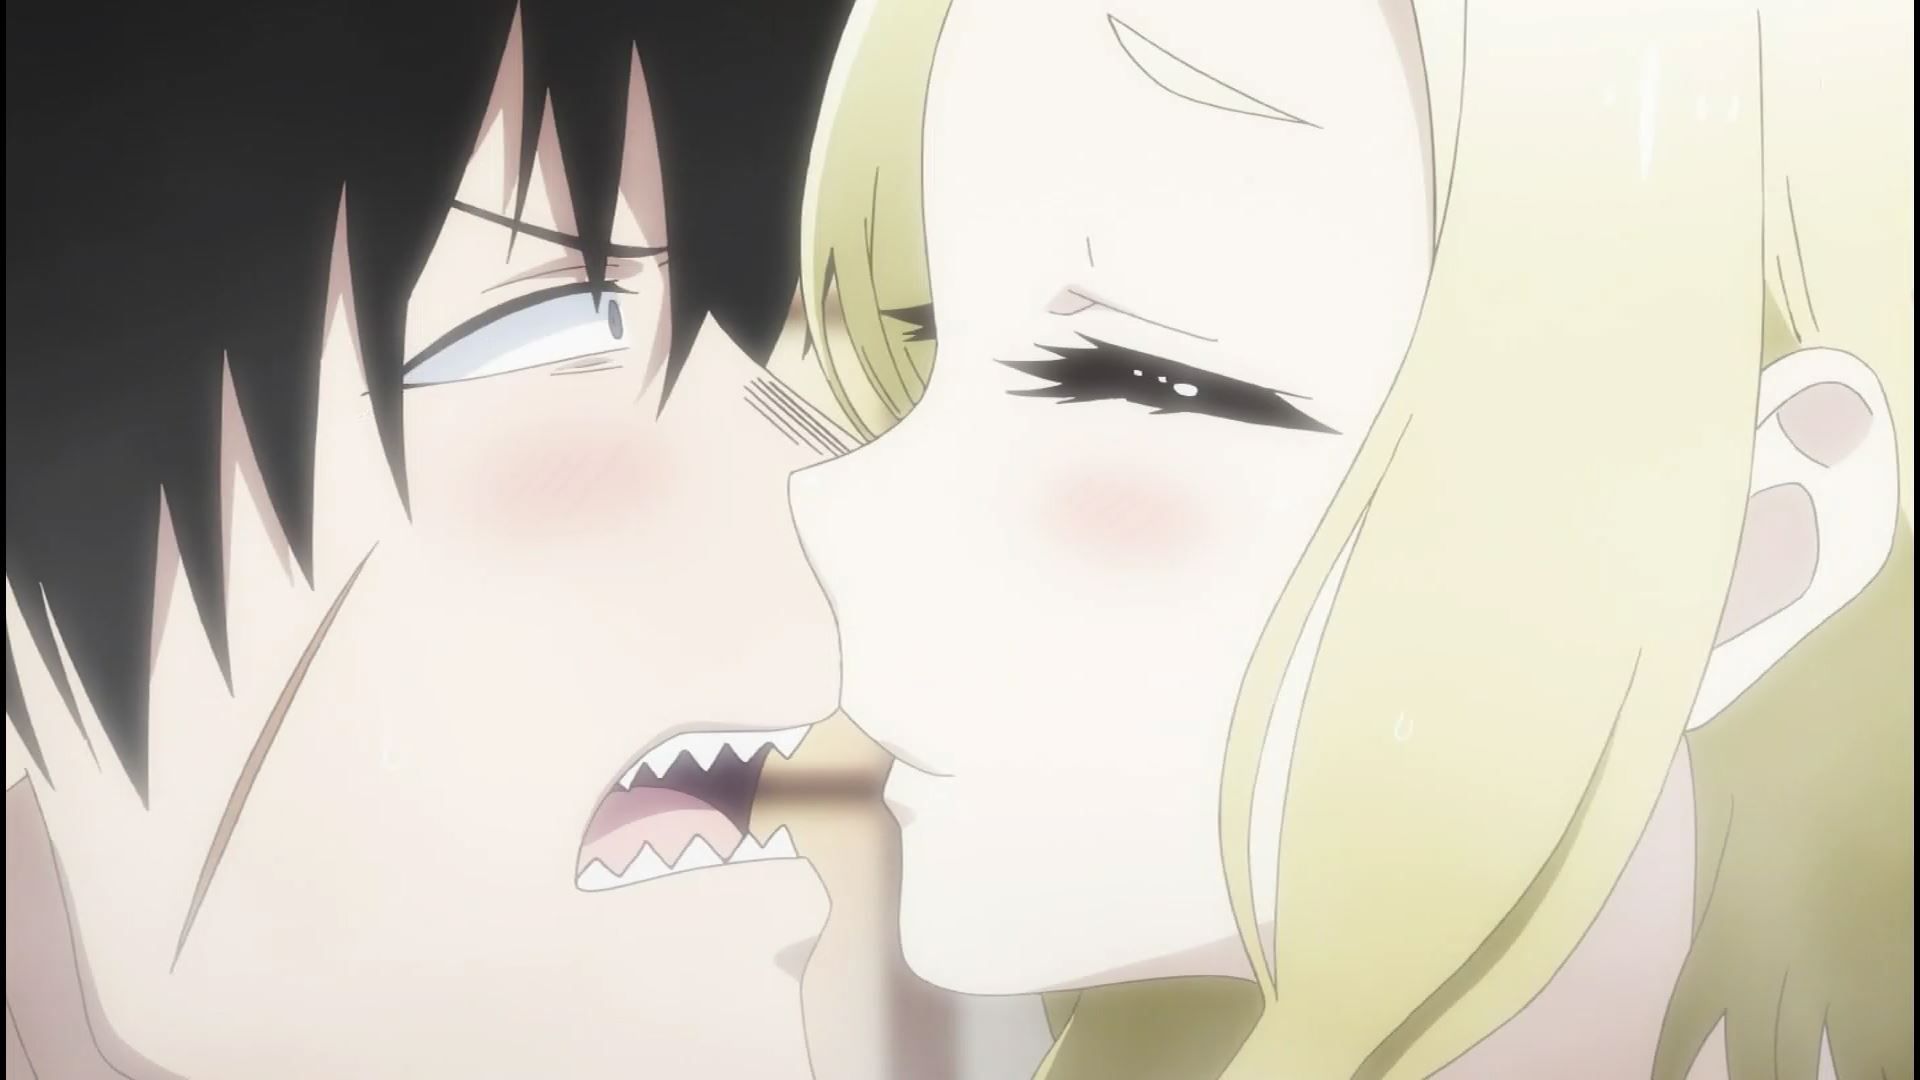 Anime [War x Love (Vallav)] In 11 episodes and become naked with girls and deep kiss or erotic scene! 9